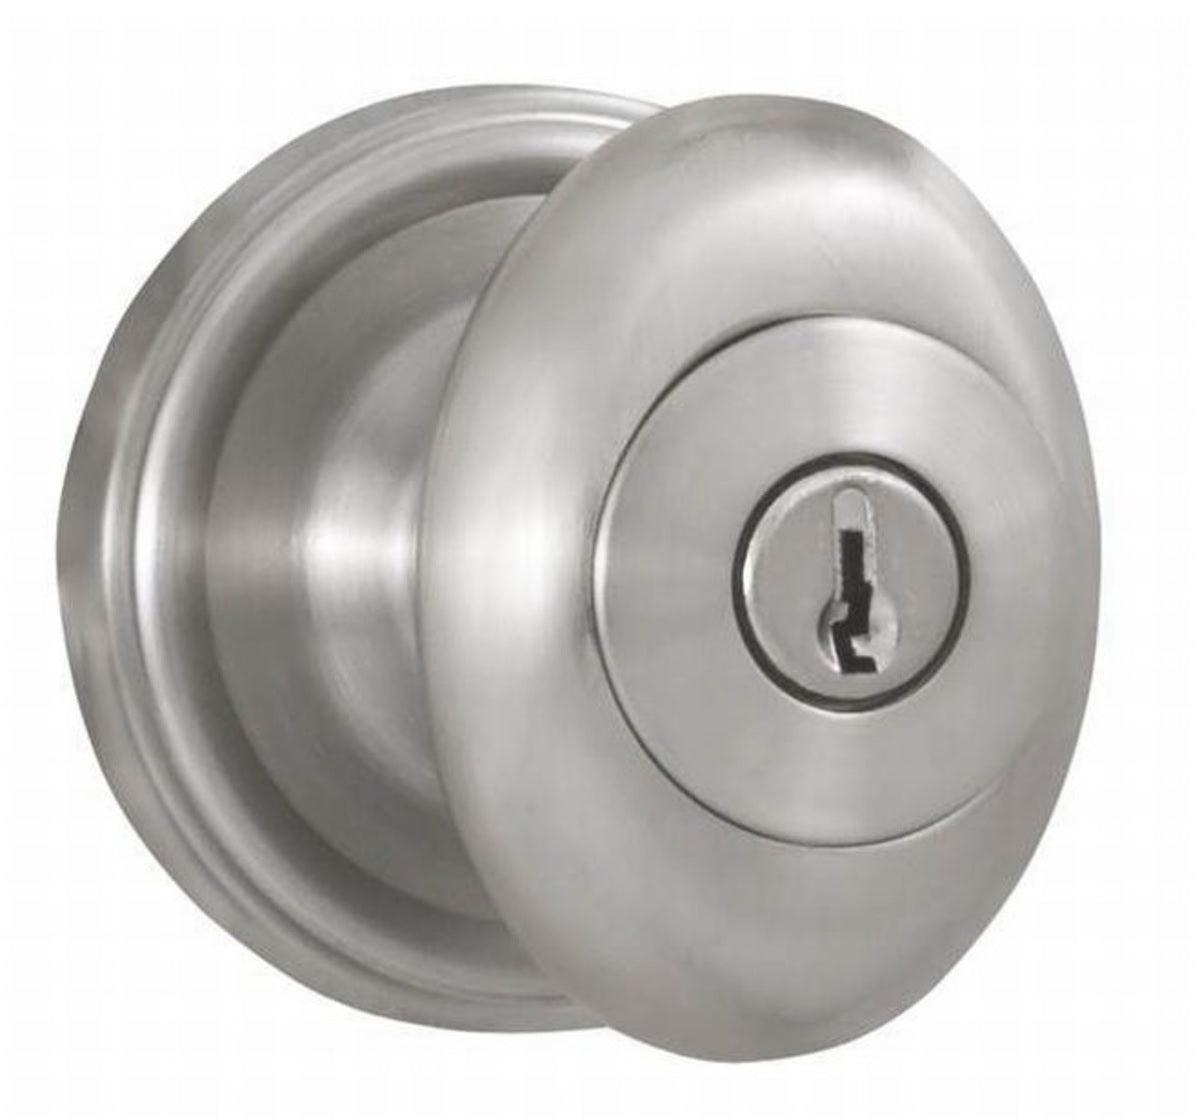 buy commercial locksets at cheap rate in bulk. wholesale & retail building hardware supplies store. home décor ideas, maintenance, repair replacement parts